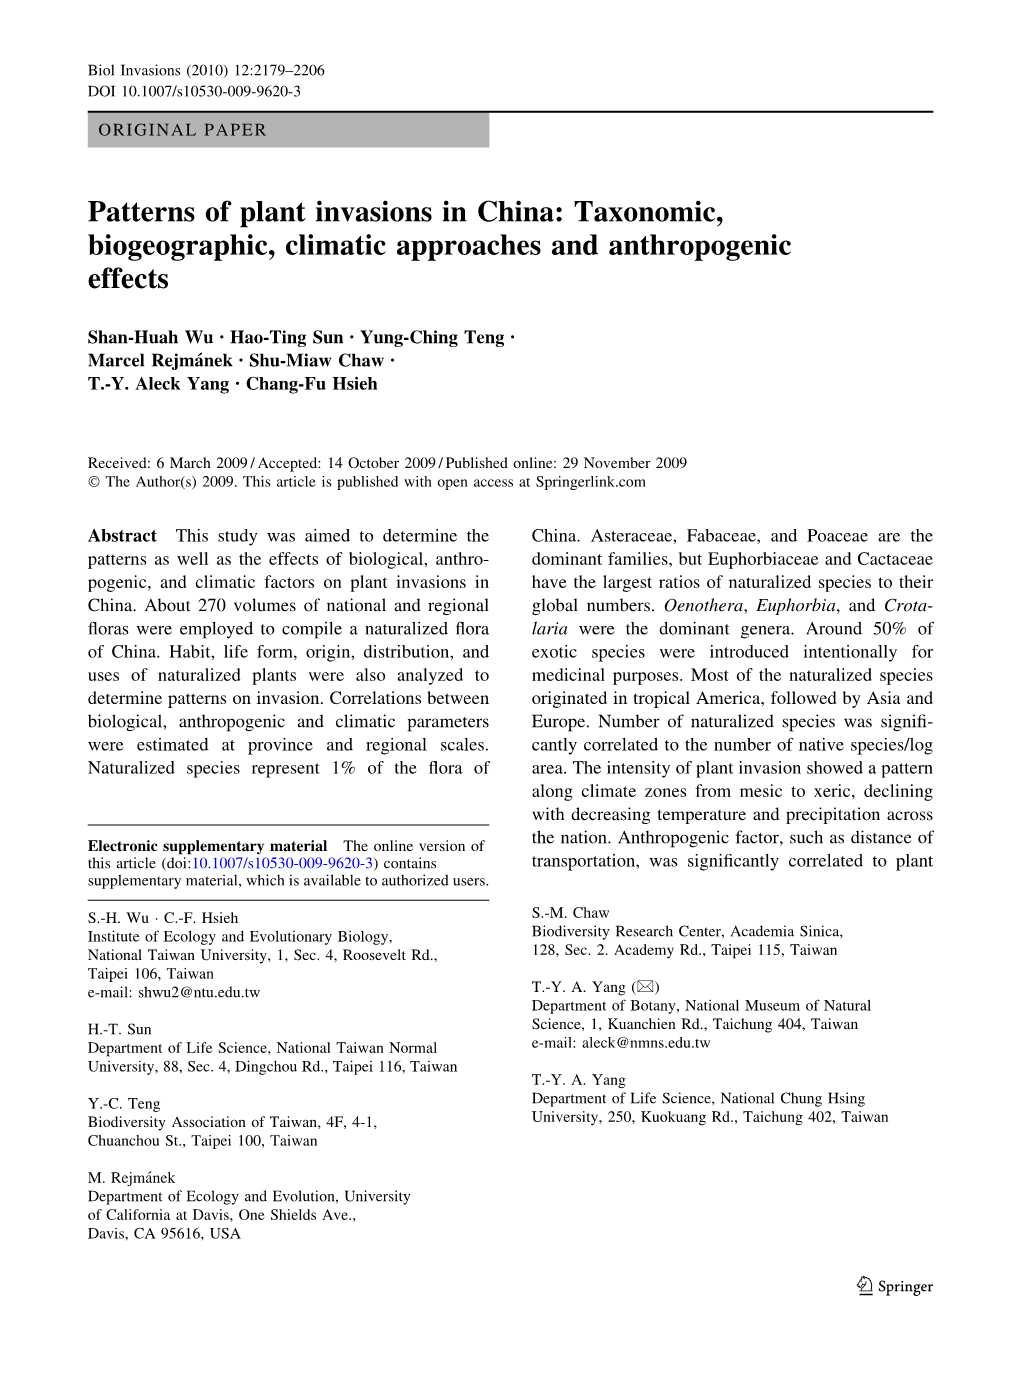 Patterns of Plant Invasions in China: Taxonomic, Biogeographic, Climatic Approaches and Anthropogenic Effects